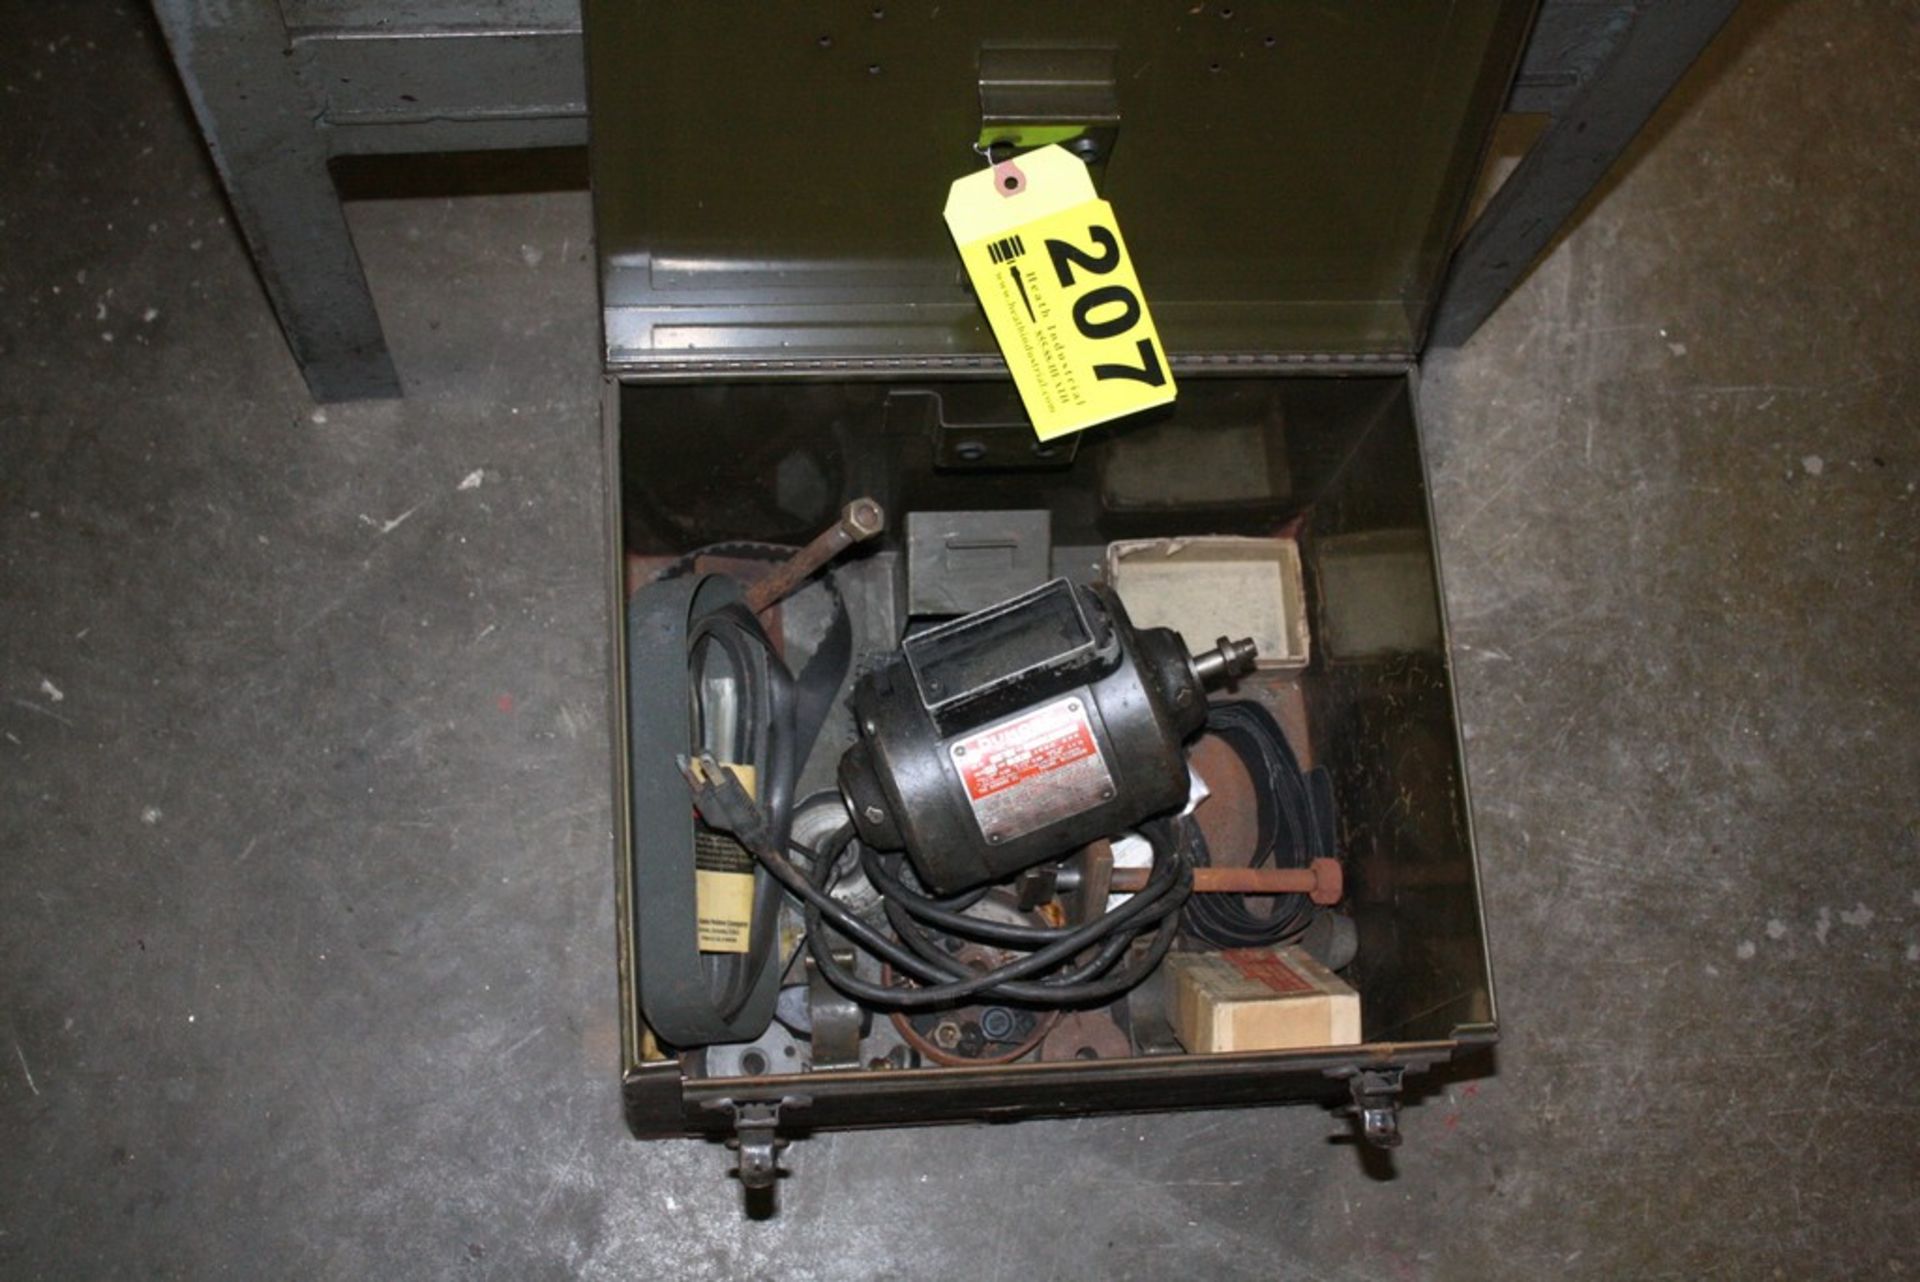 DUMORE NO. 5G1 TOOL POST GRINDER WITH CASE